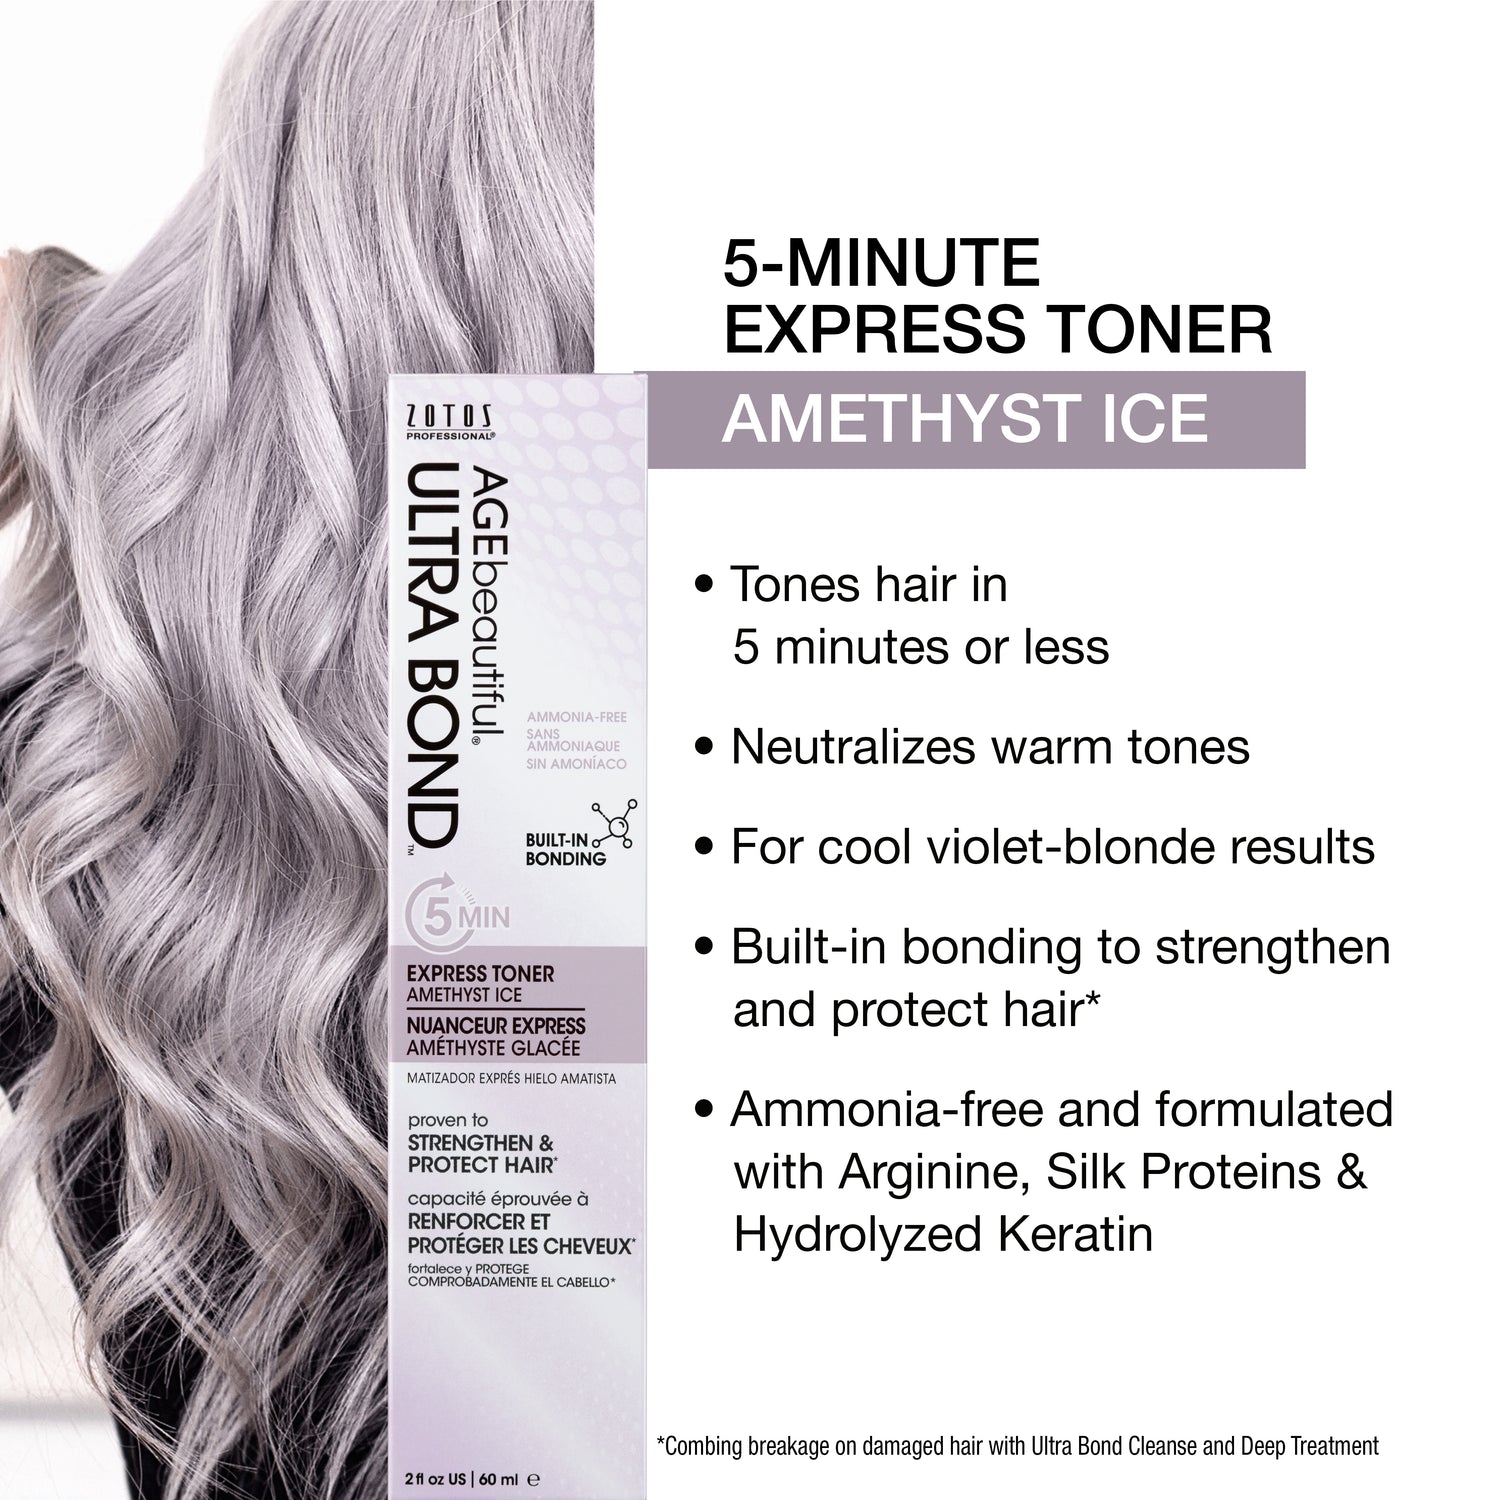 Tones hair in 5 minutes or less. Neutralizes warm tones. For cool violet-blonde results. Built-in bonding to strengthen and protect hair. Ammonia-free and formulated with Arginine, Silk Proteins and Hydrolyzed Keratin. 